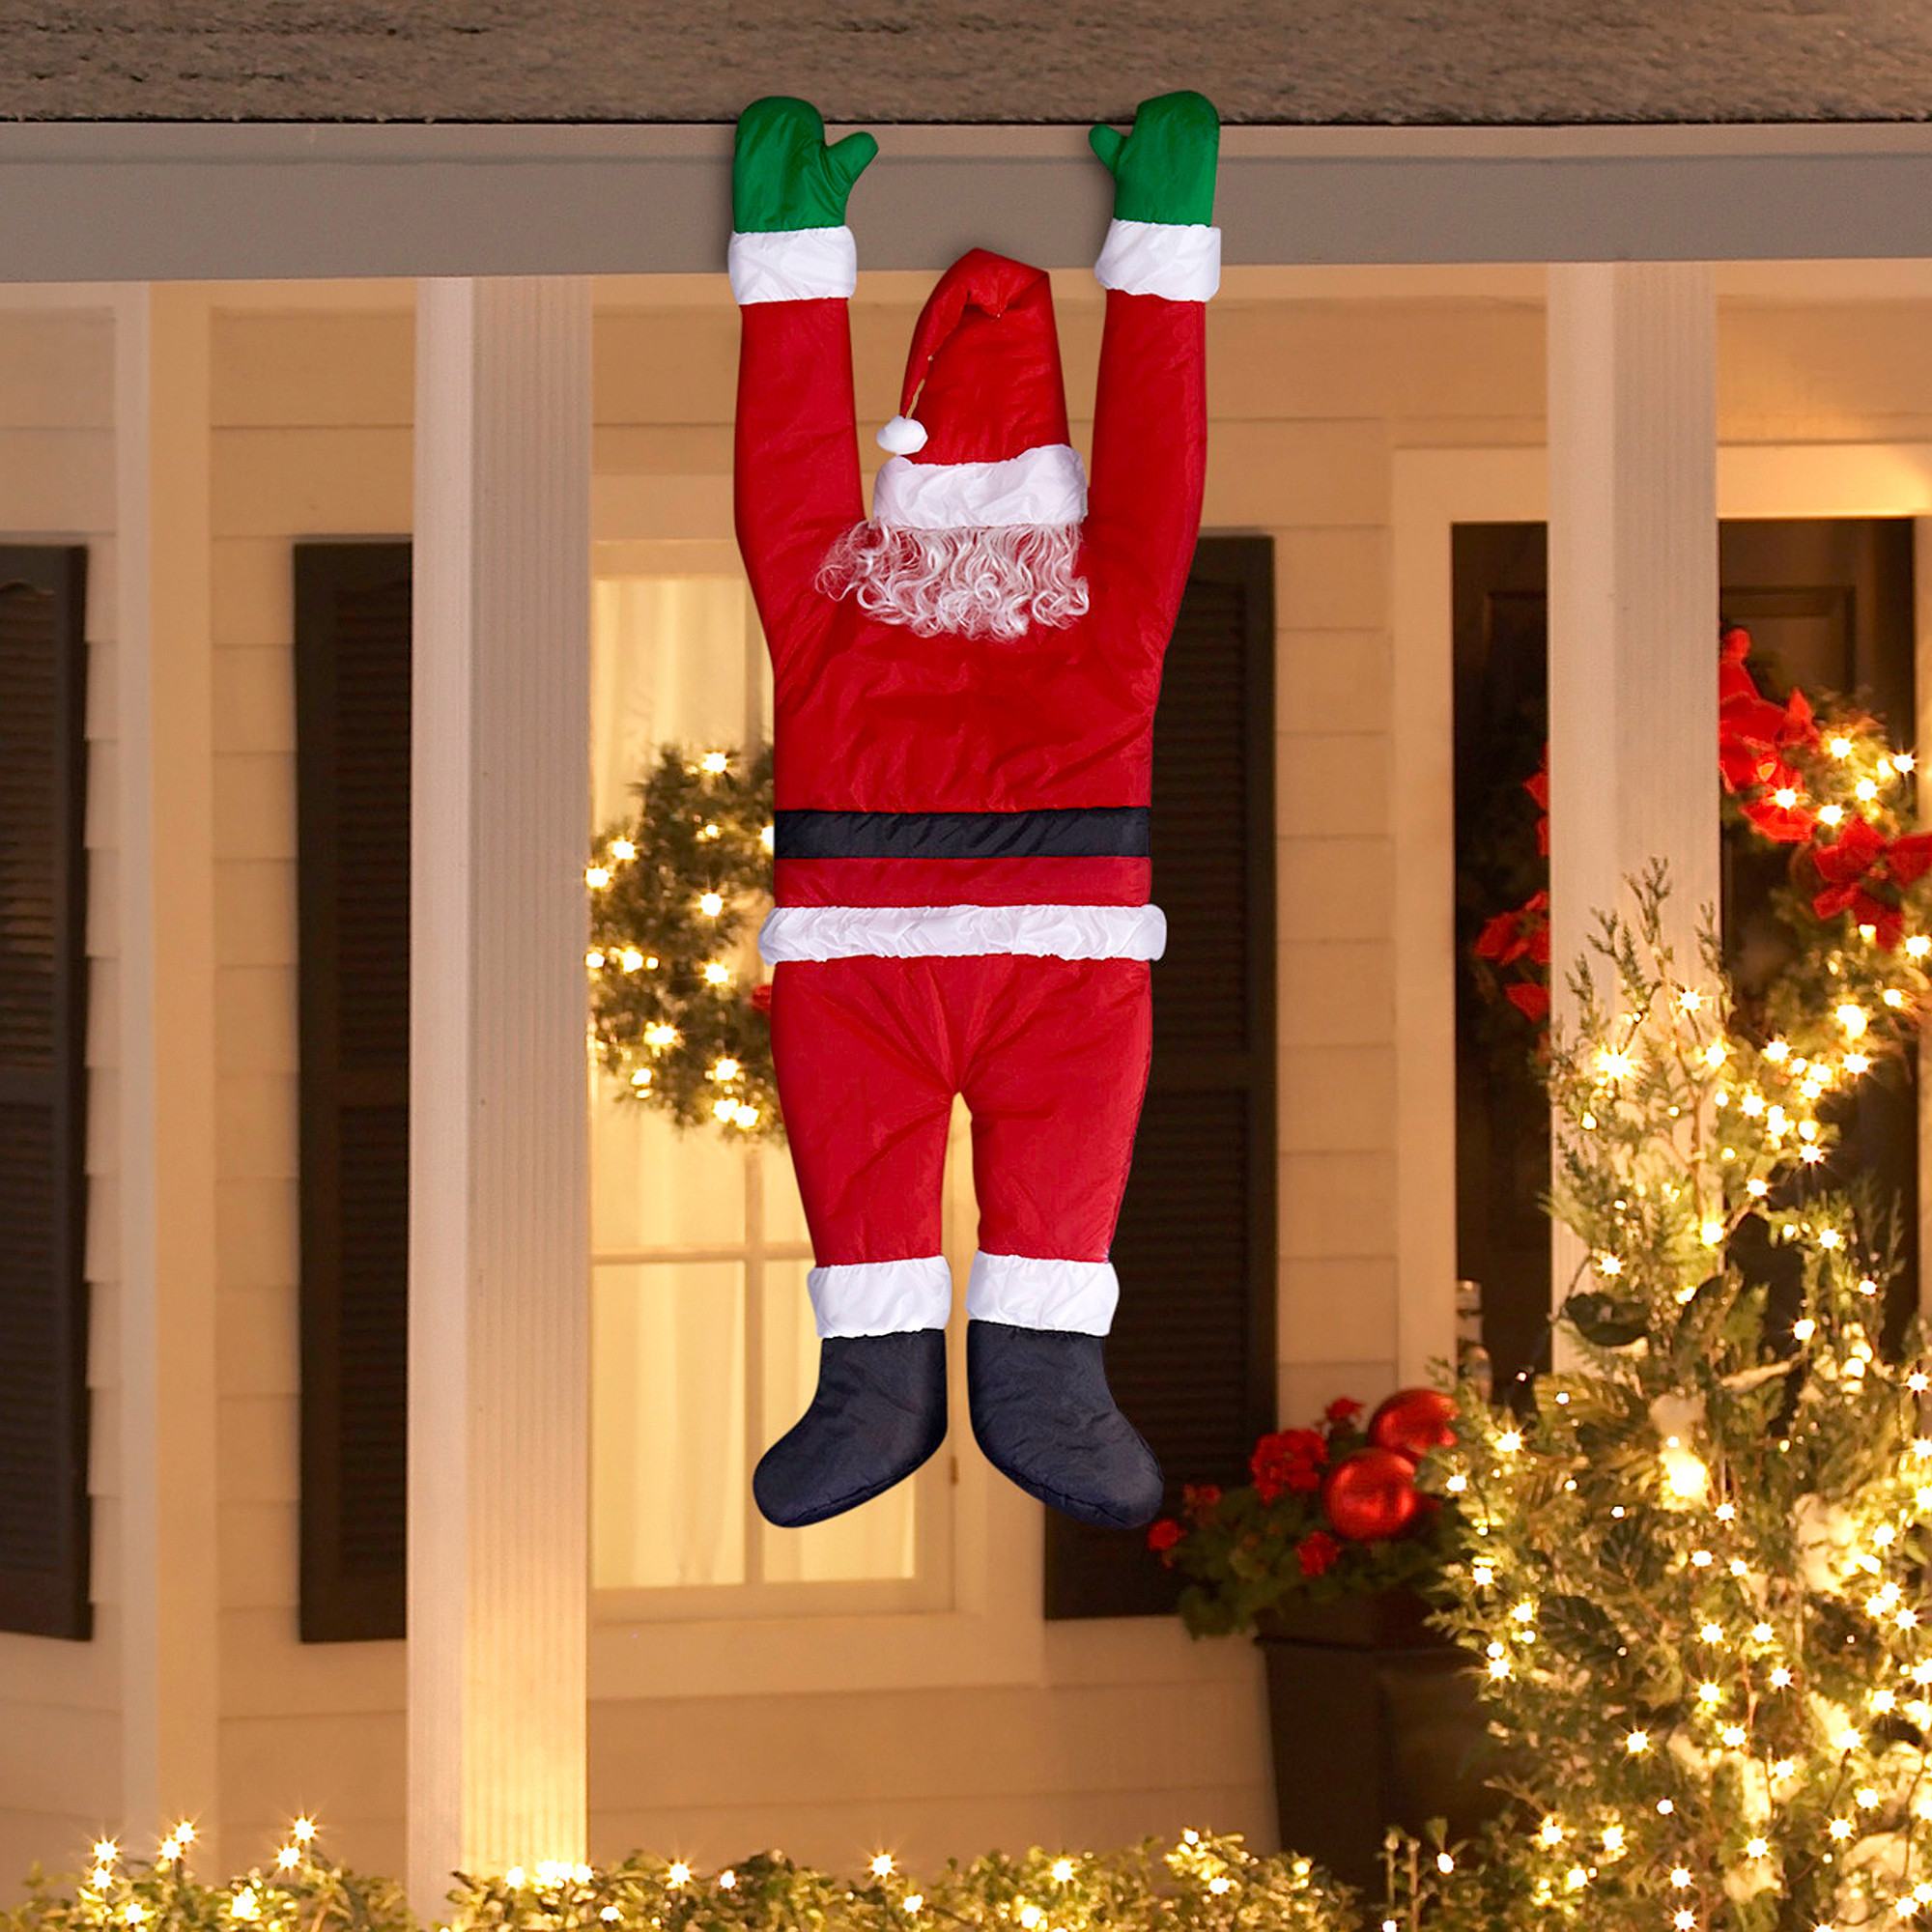 Walmart Outdoor Christmas Lights
 Holiday Time Christmas Decor Hanging Santa by Gemmy